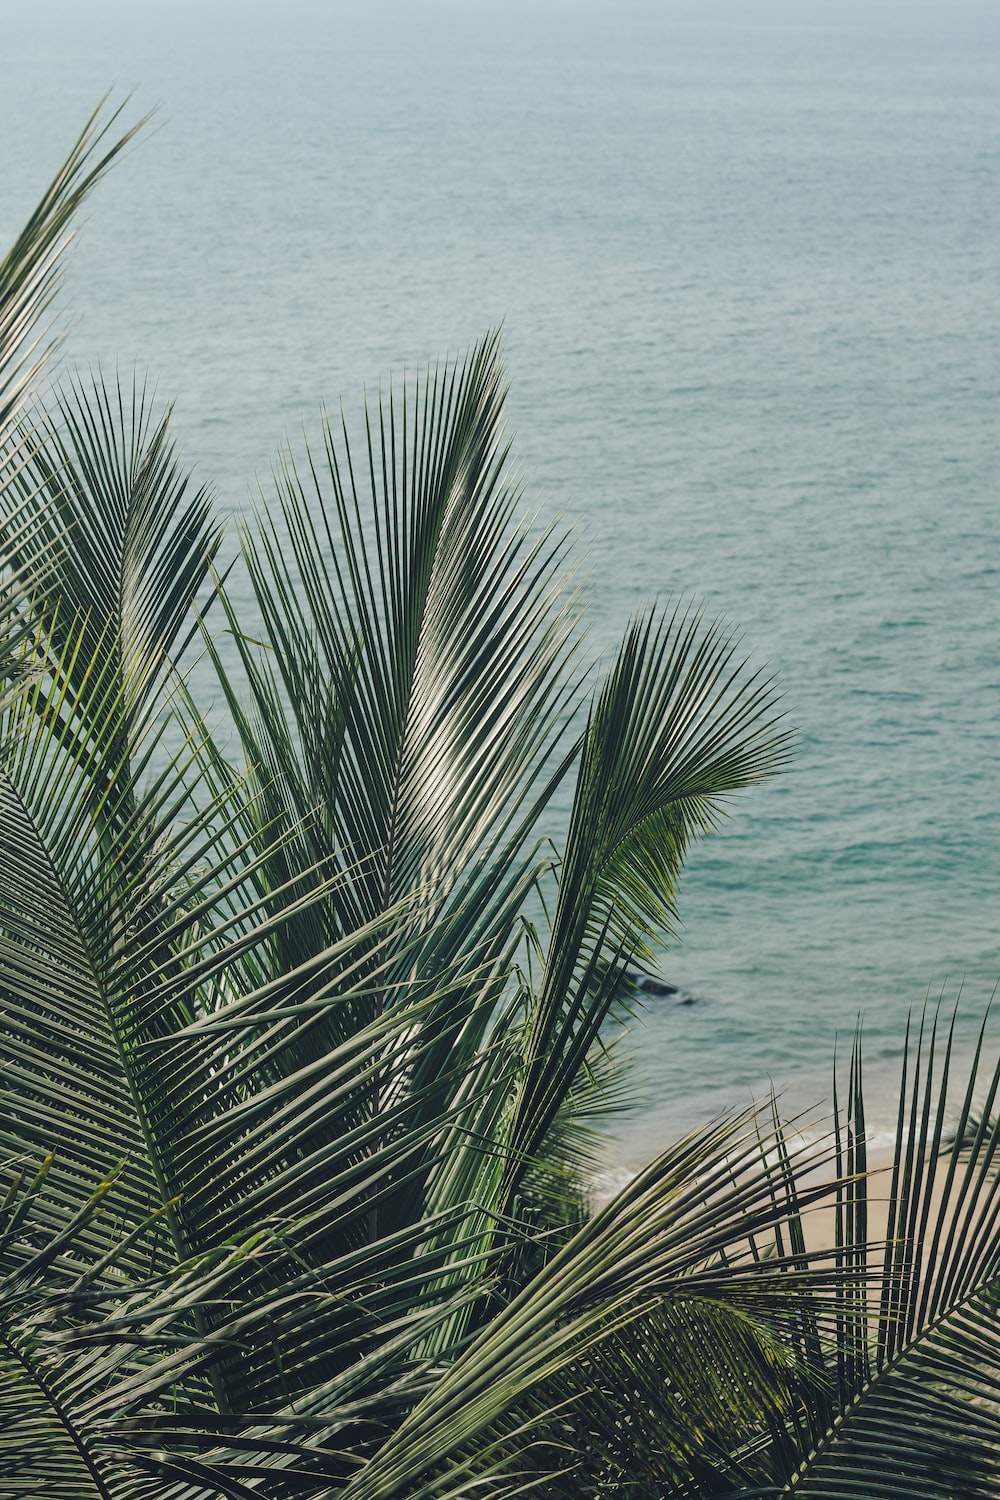 A beach with palm trees and the ocean - Palm tree